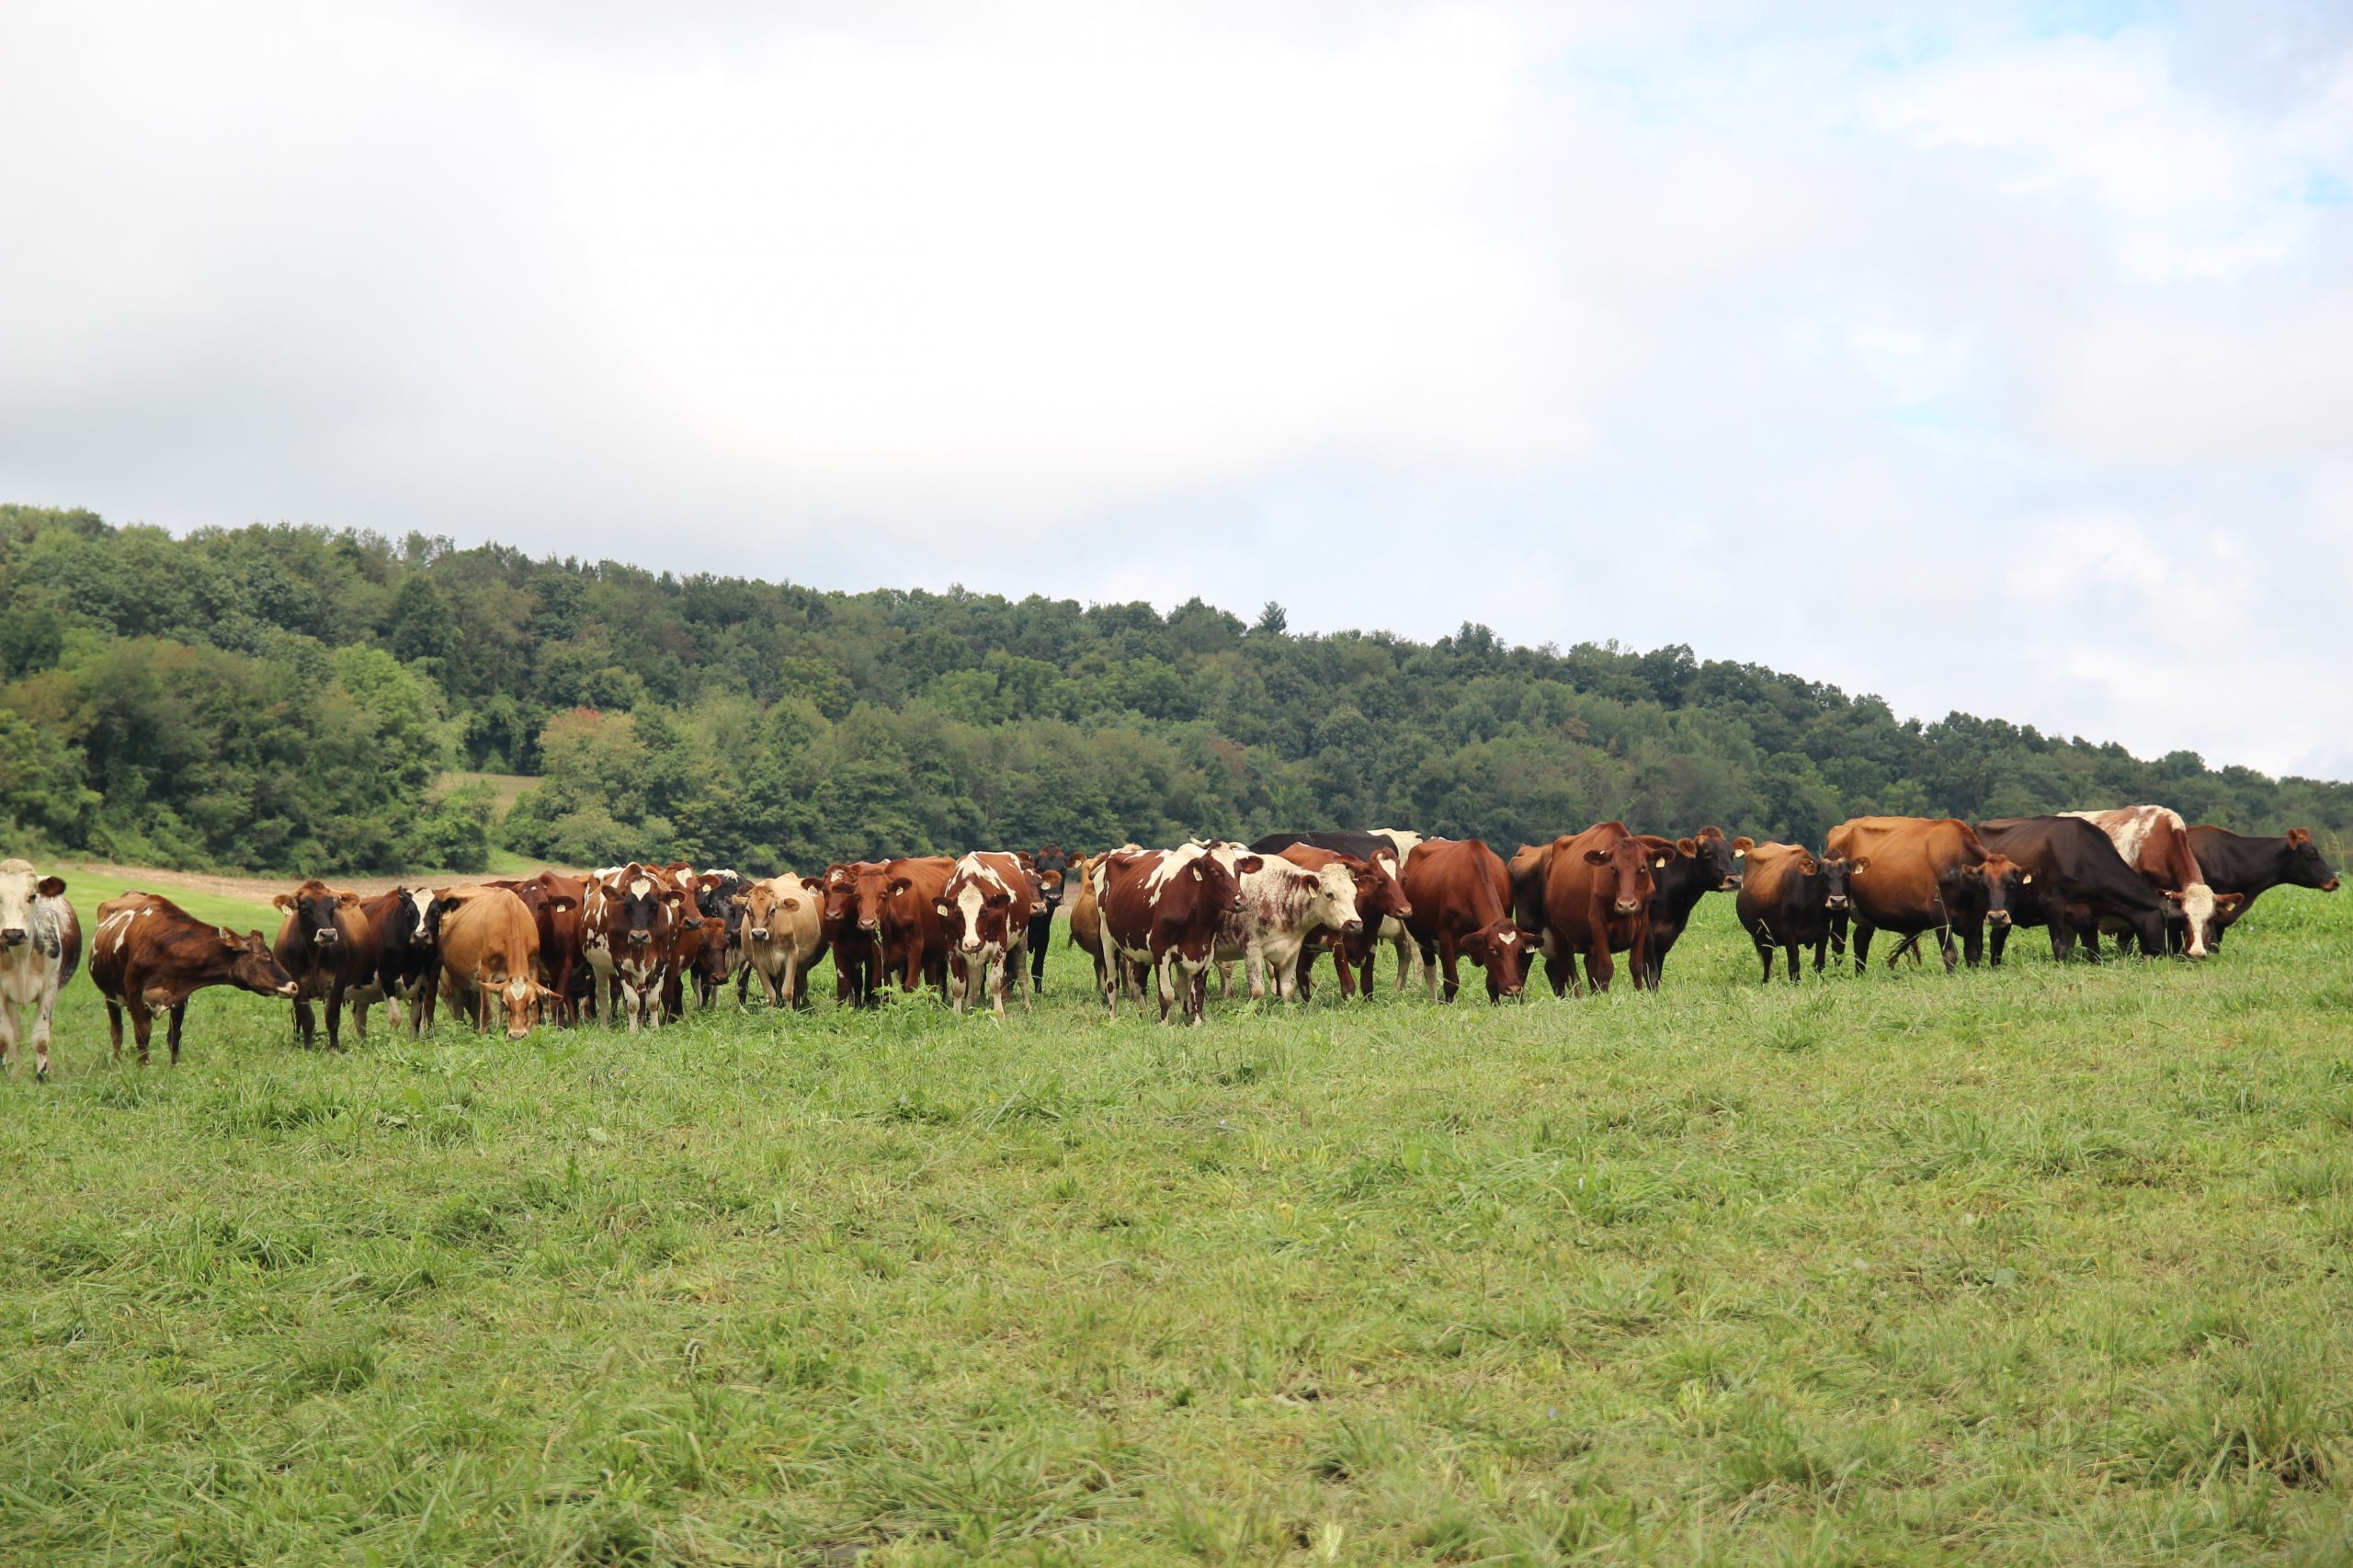 A herd of cows in a green field